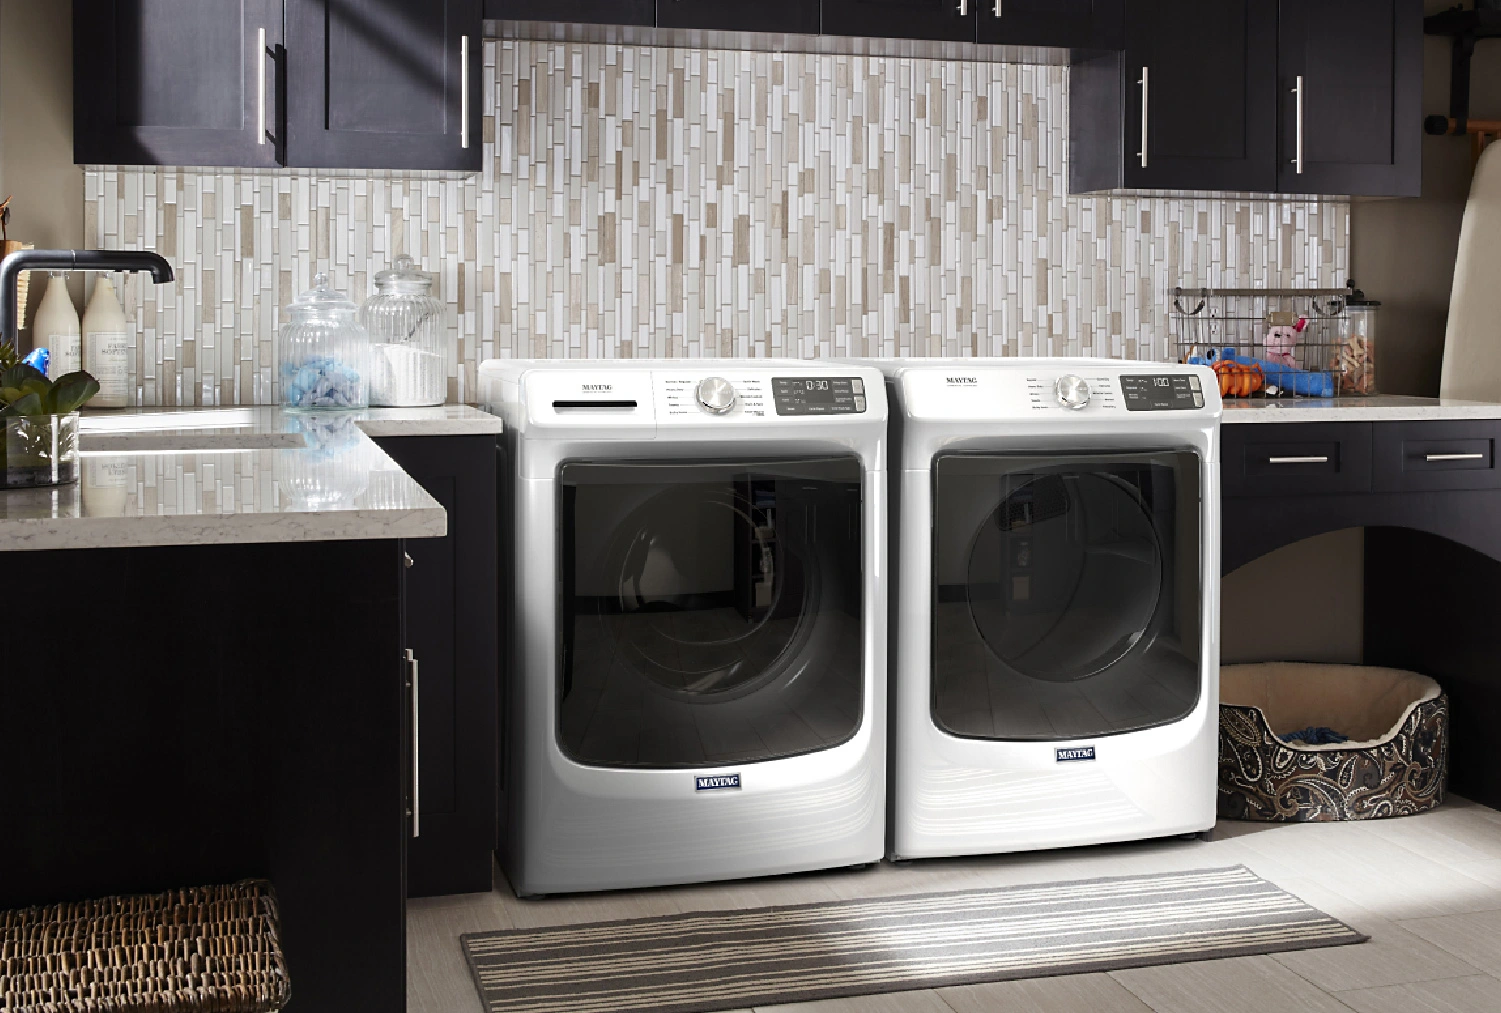 A stylish laundry room design featuring a front load washer and dryer set, laundry room sink and additional storage for kids and pets.